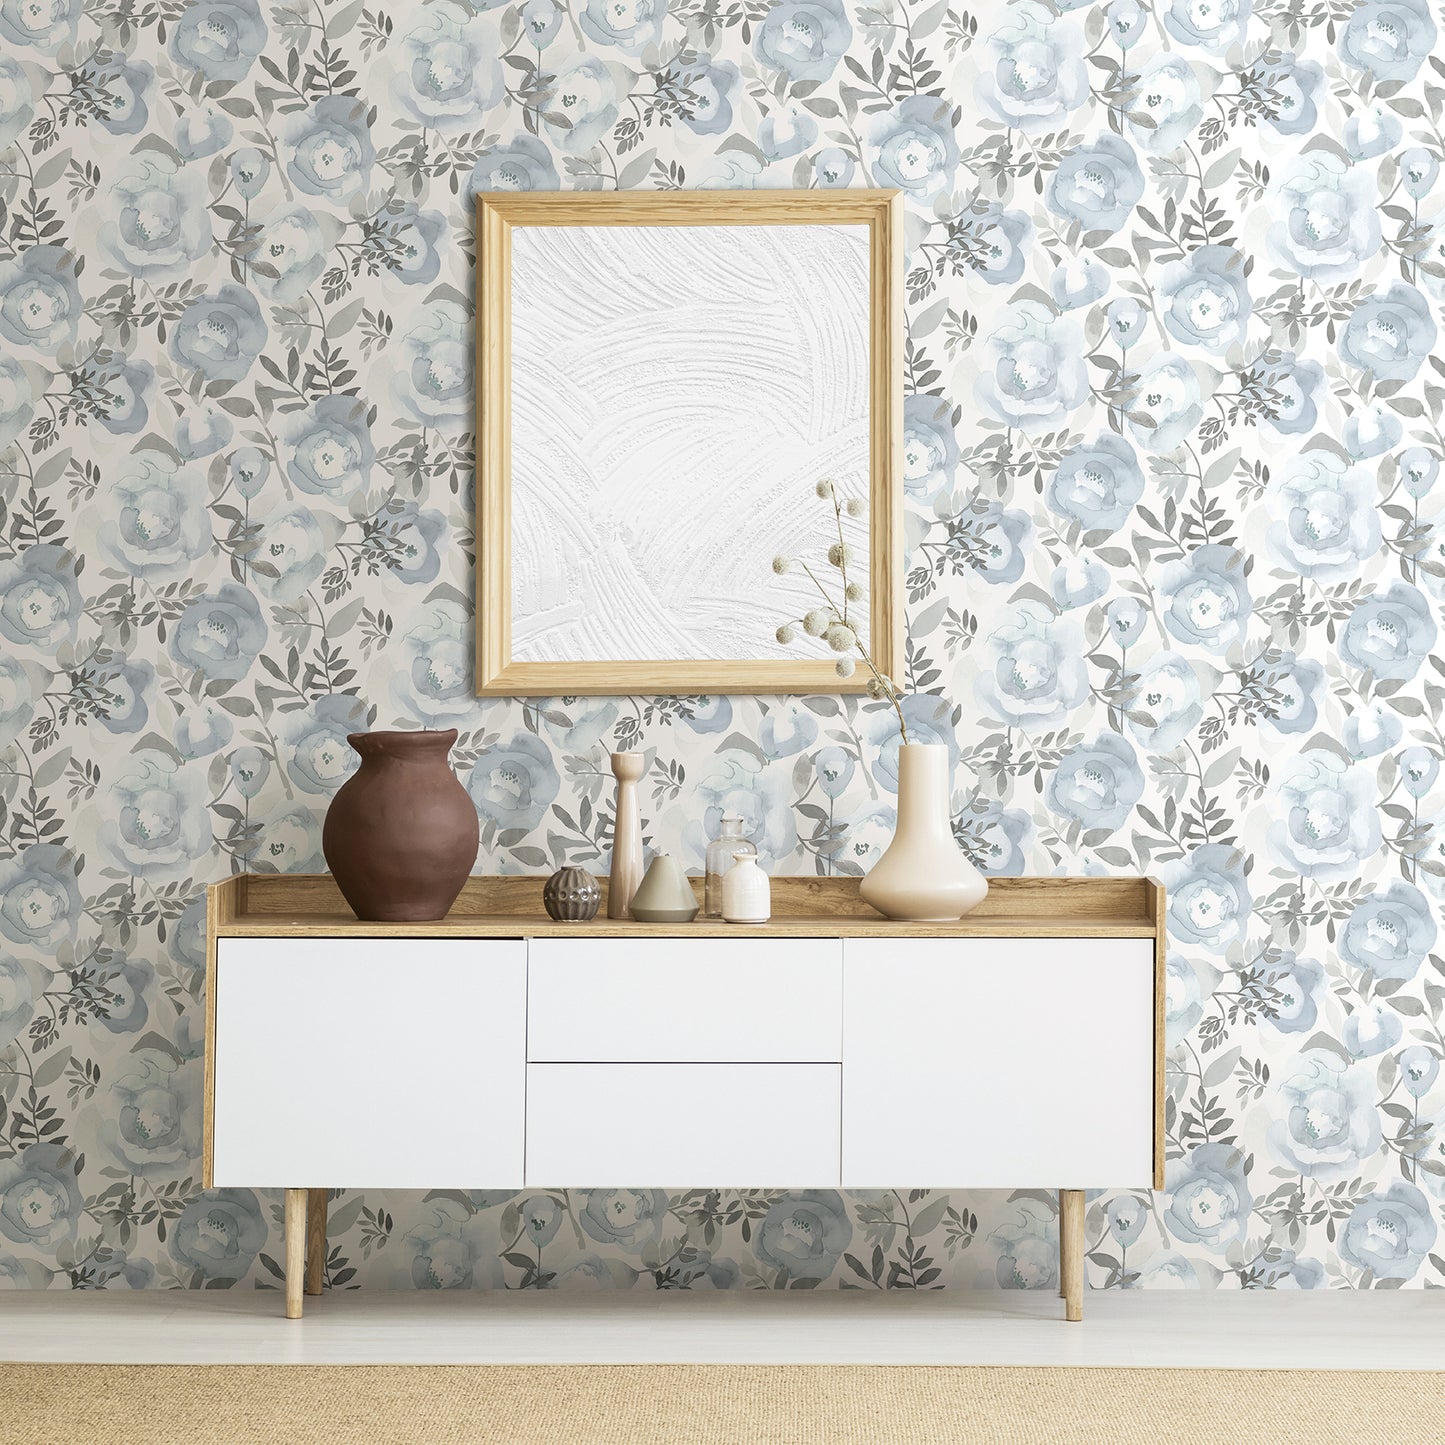 Acquire 2903-25841 Blue Bell Orla Blue Floral A Street Prints Wallpaper